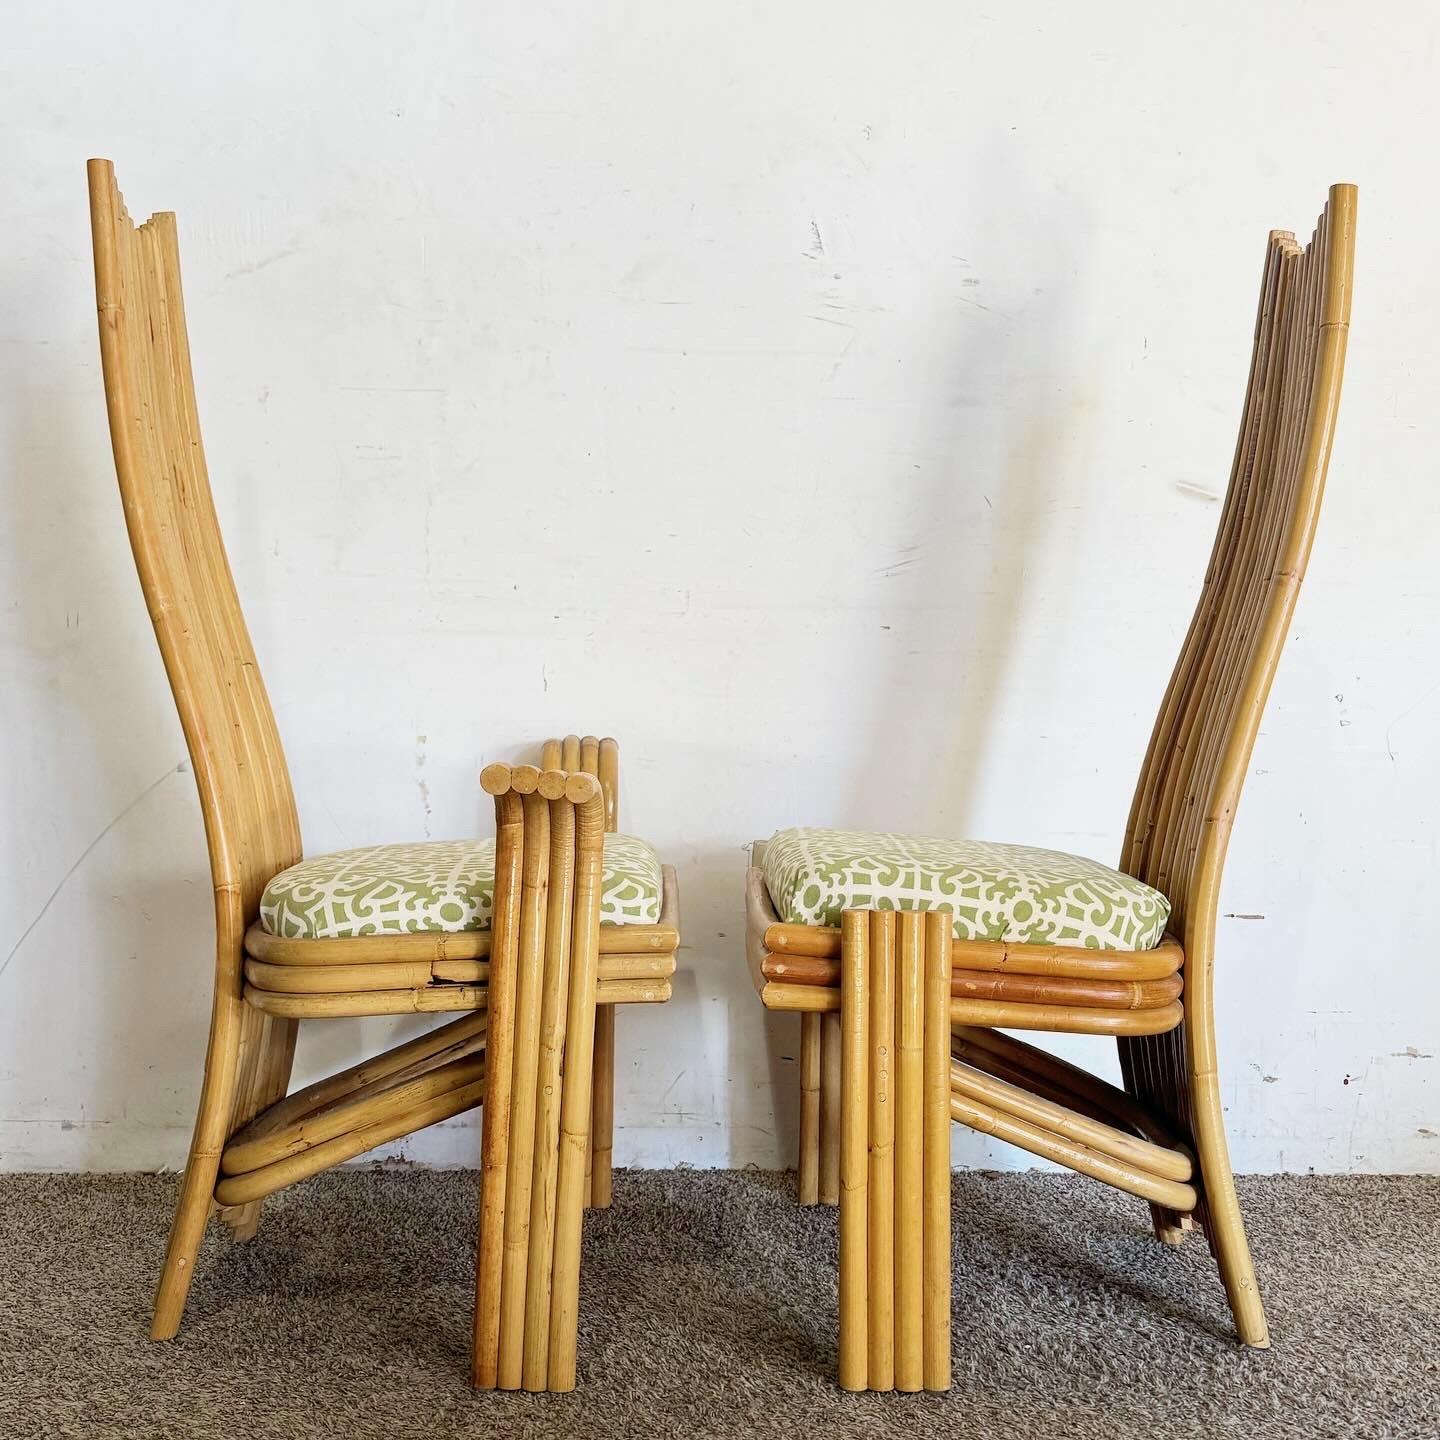 1970s Vintage Boho Chic High Back Bamboo Dining Chairs - Set of 6 In Good Condition For Sale In Delray Beach, FL